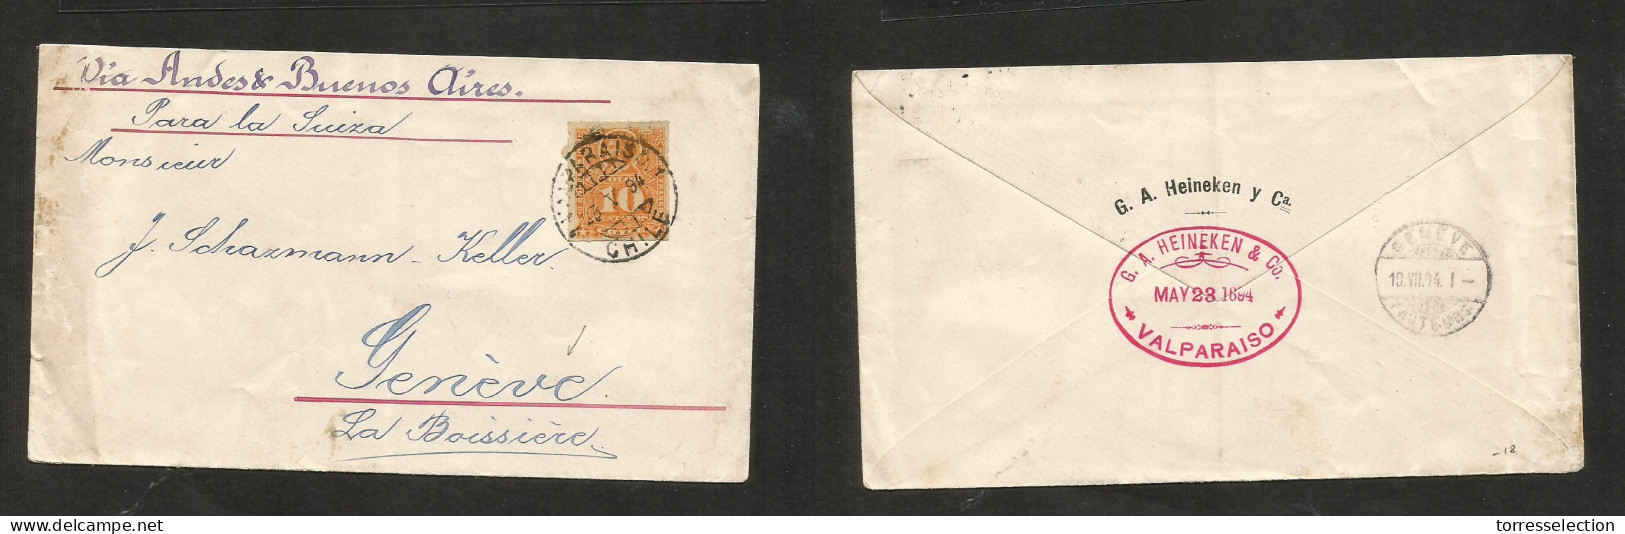 CHILE. 1894 (23 May) Valp - Switzerland, Geneve (10 July) Via Andes - Buenos Aires. Fkd Env 10c Orange Perce, Tied Cds.  - Cile